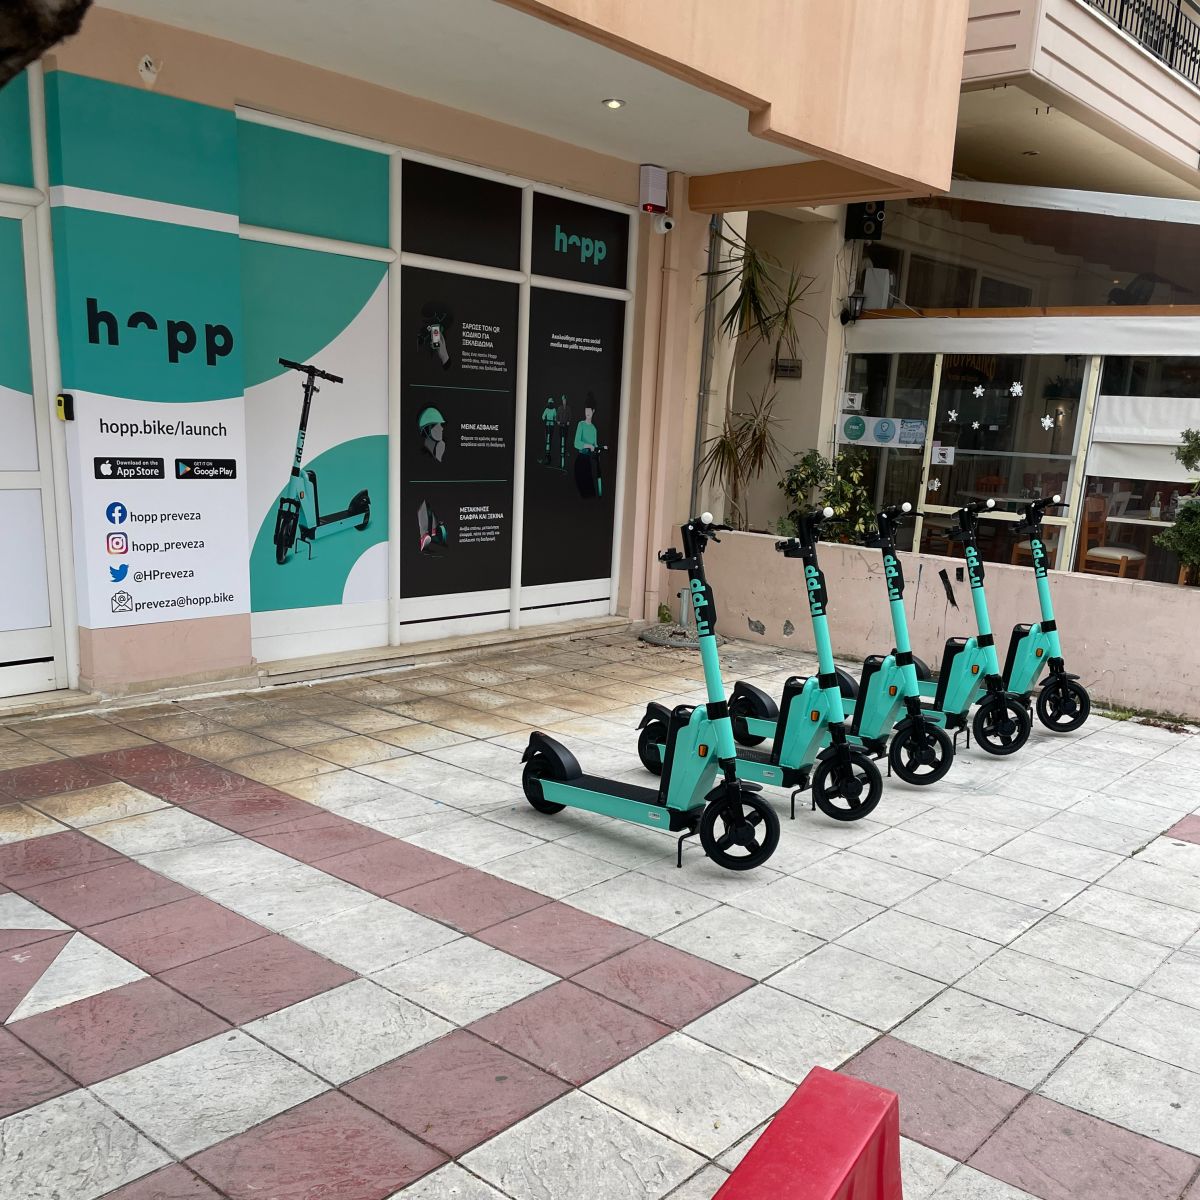 Hopp's first franchise in Greece. Located in a beautiful coastal town on the western side of Greece. 100 scooters were launched in a town of 19.000 residents.